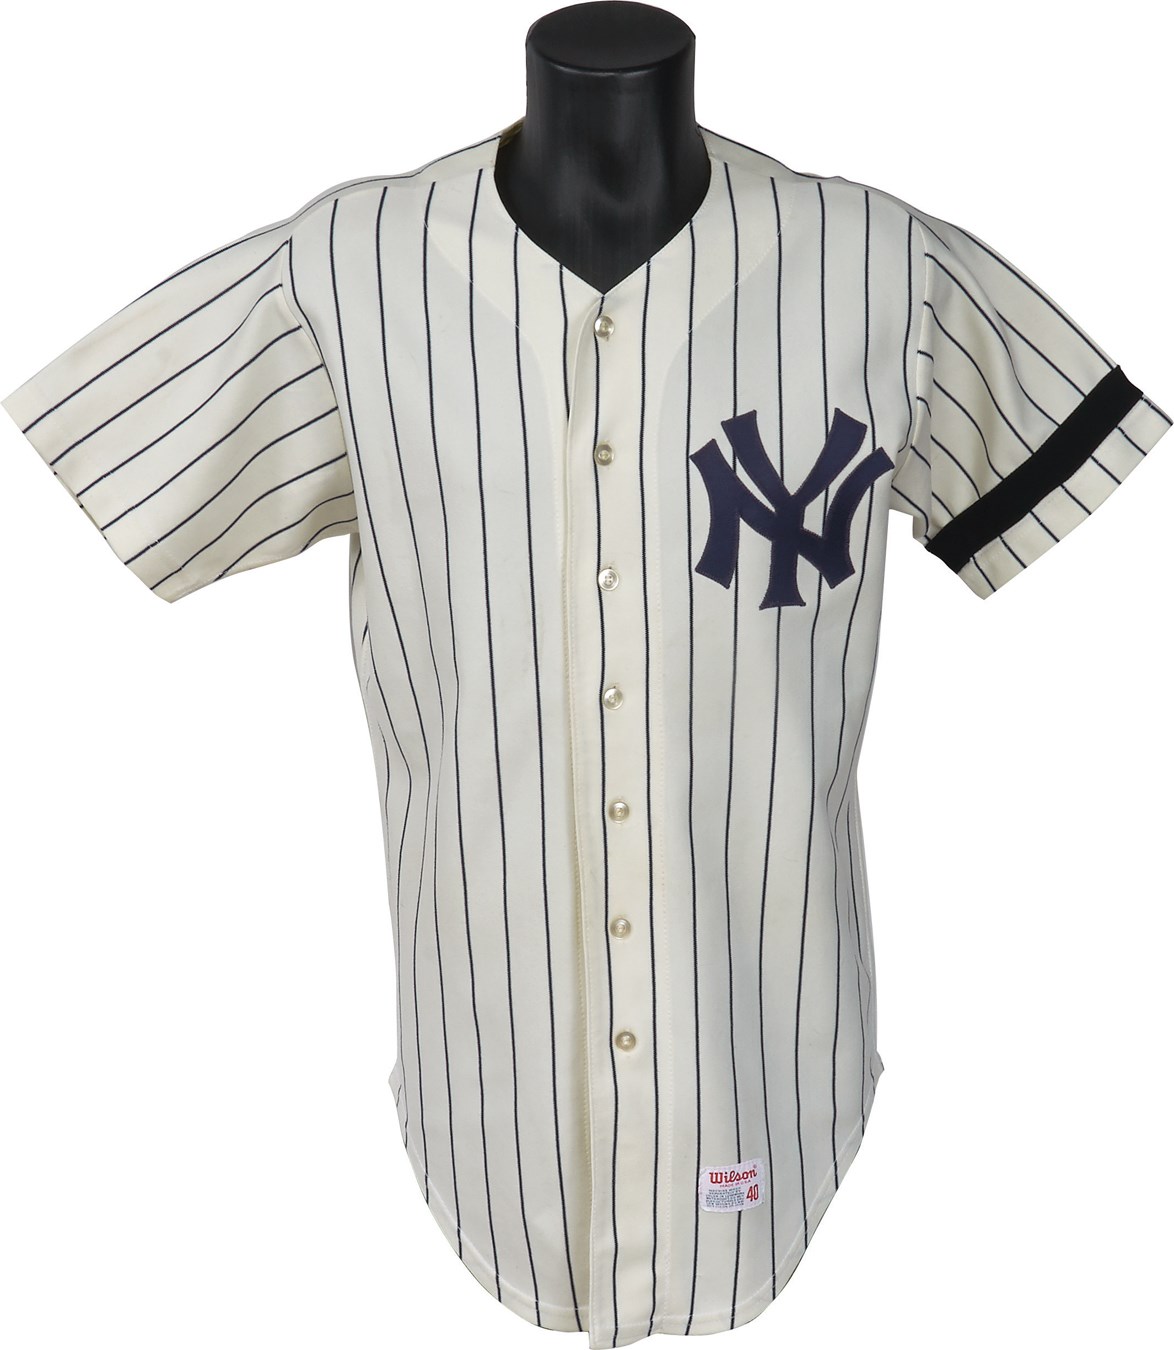 - 1978 Willie Randolph Game Worn World Series Game 2 Yankees Jersey (Photomatched)